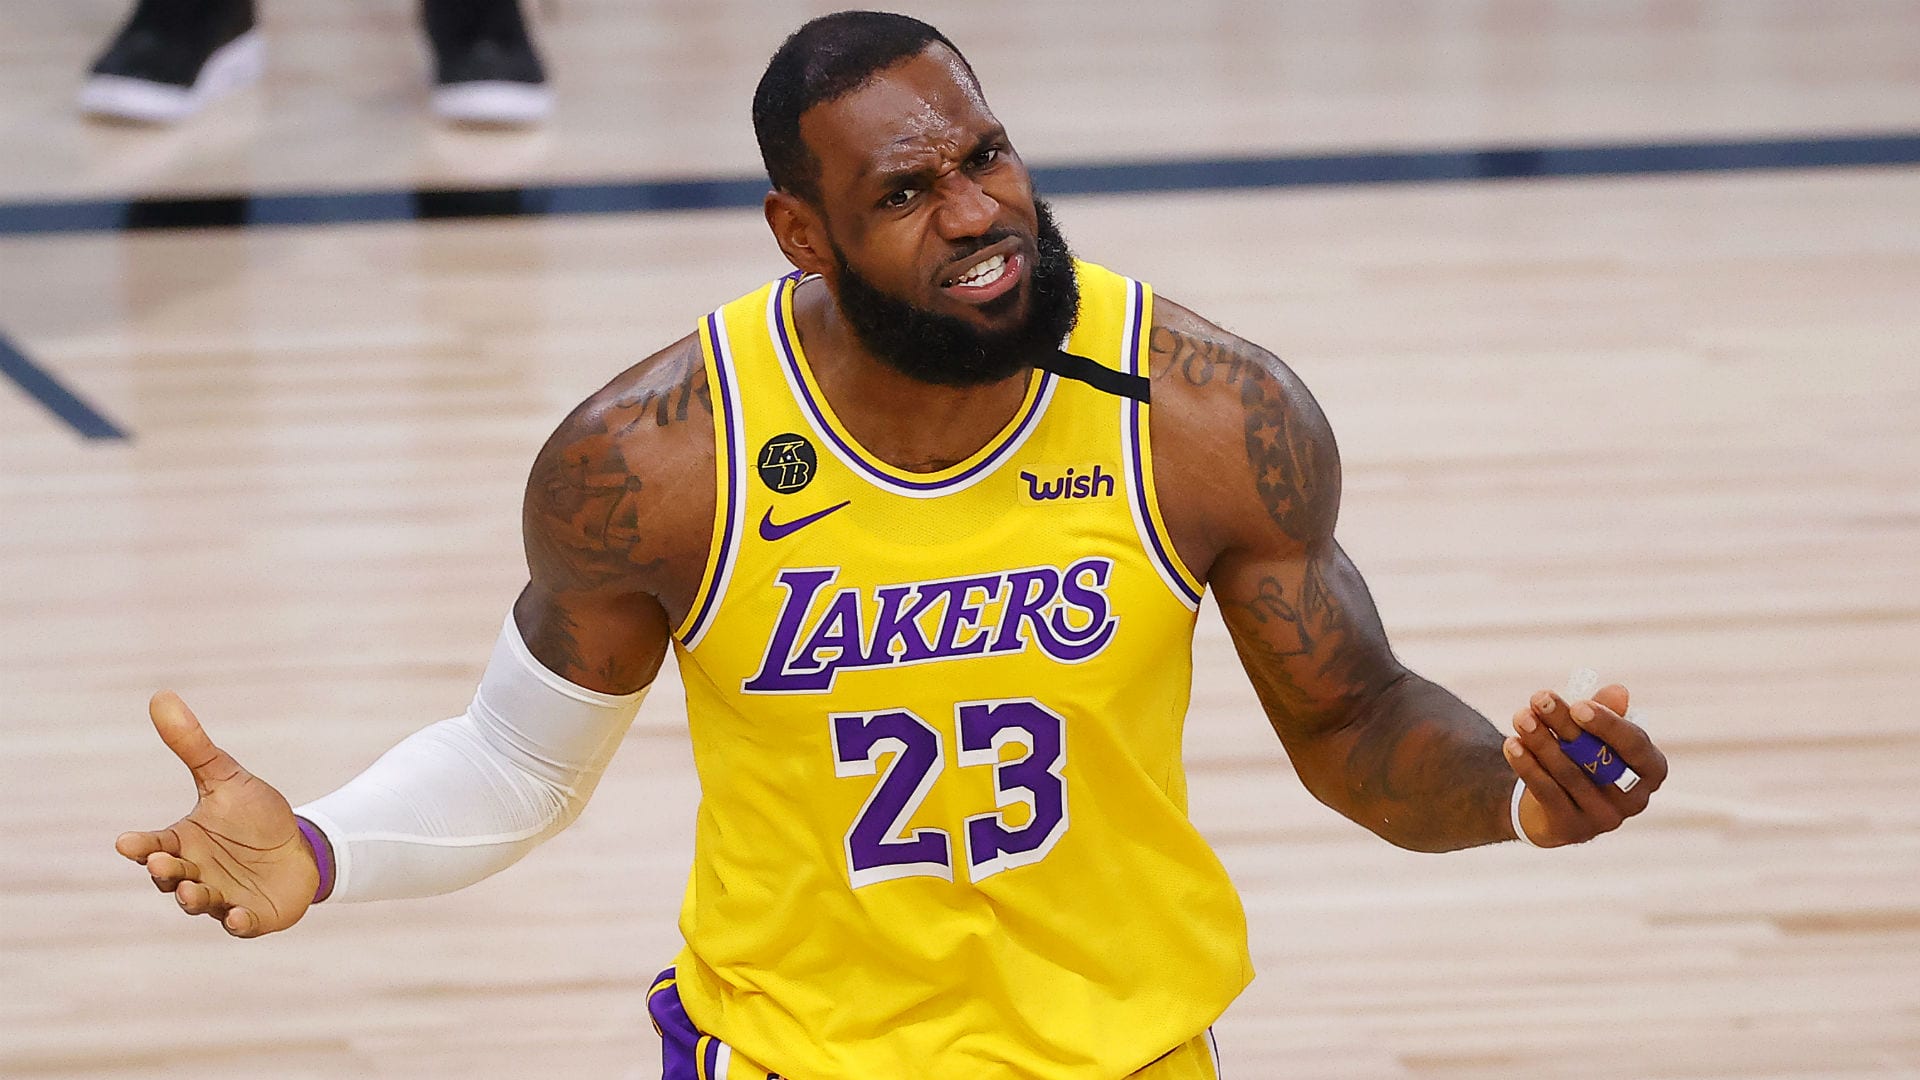 LeBron James of the the Lakers